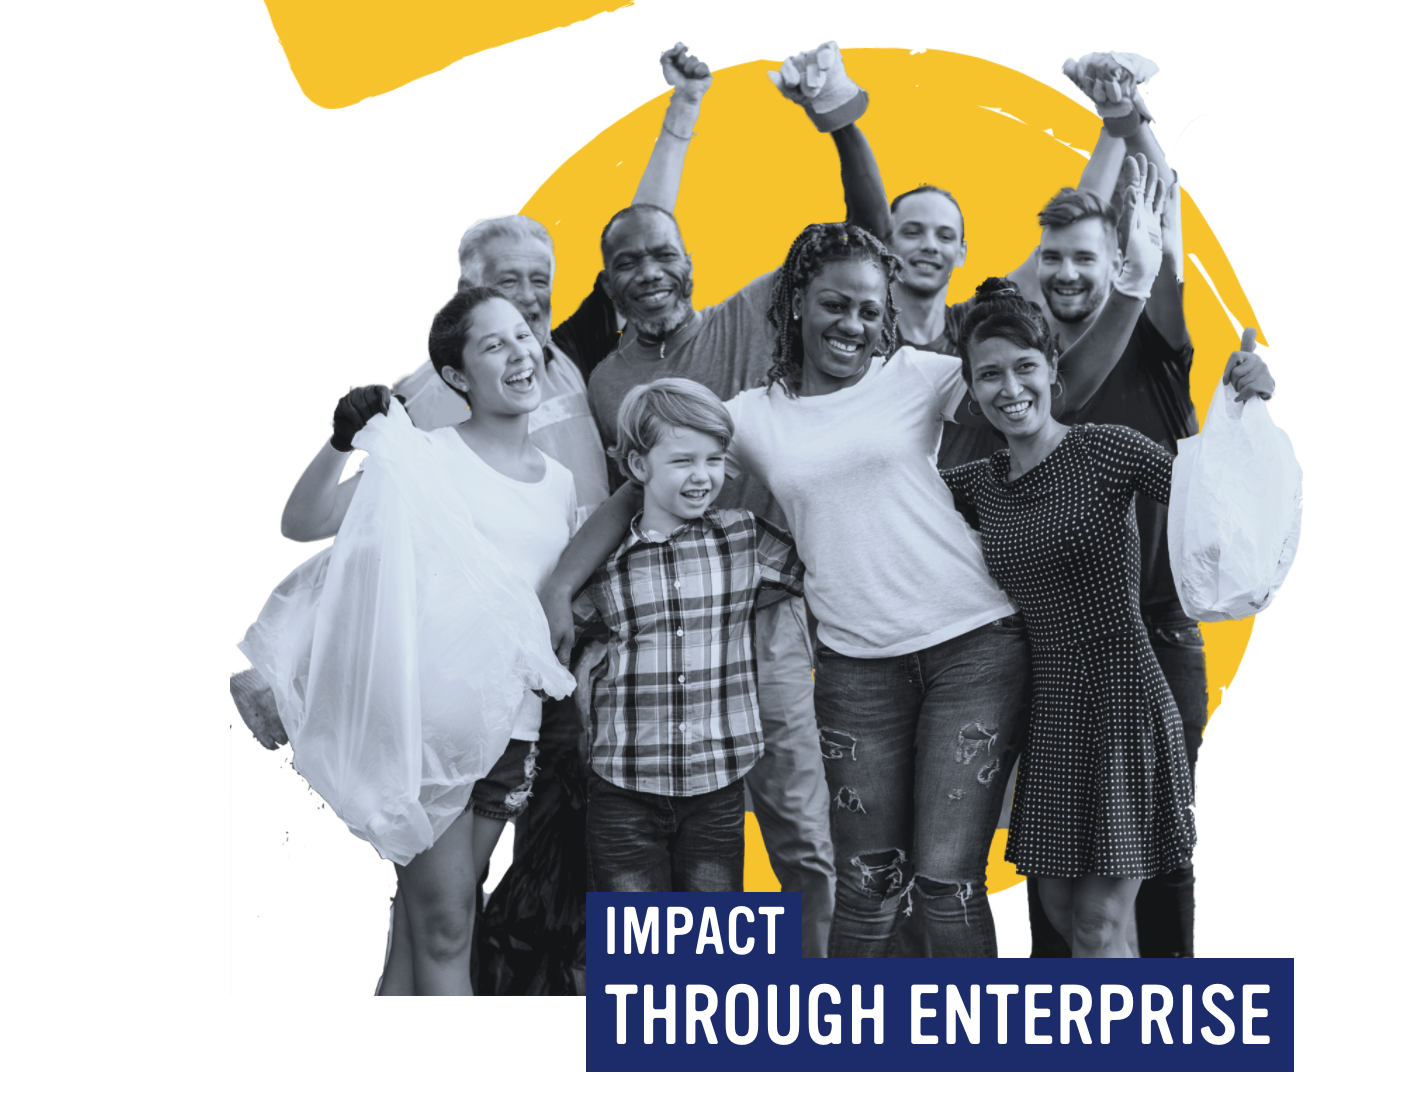 Black and white photo of 8 people of varying ages looking happy, text 'impact through enterprise'